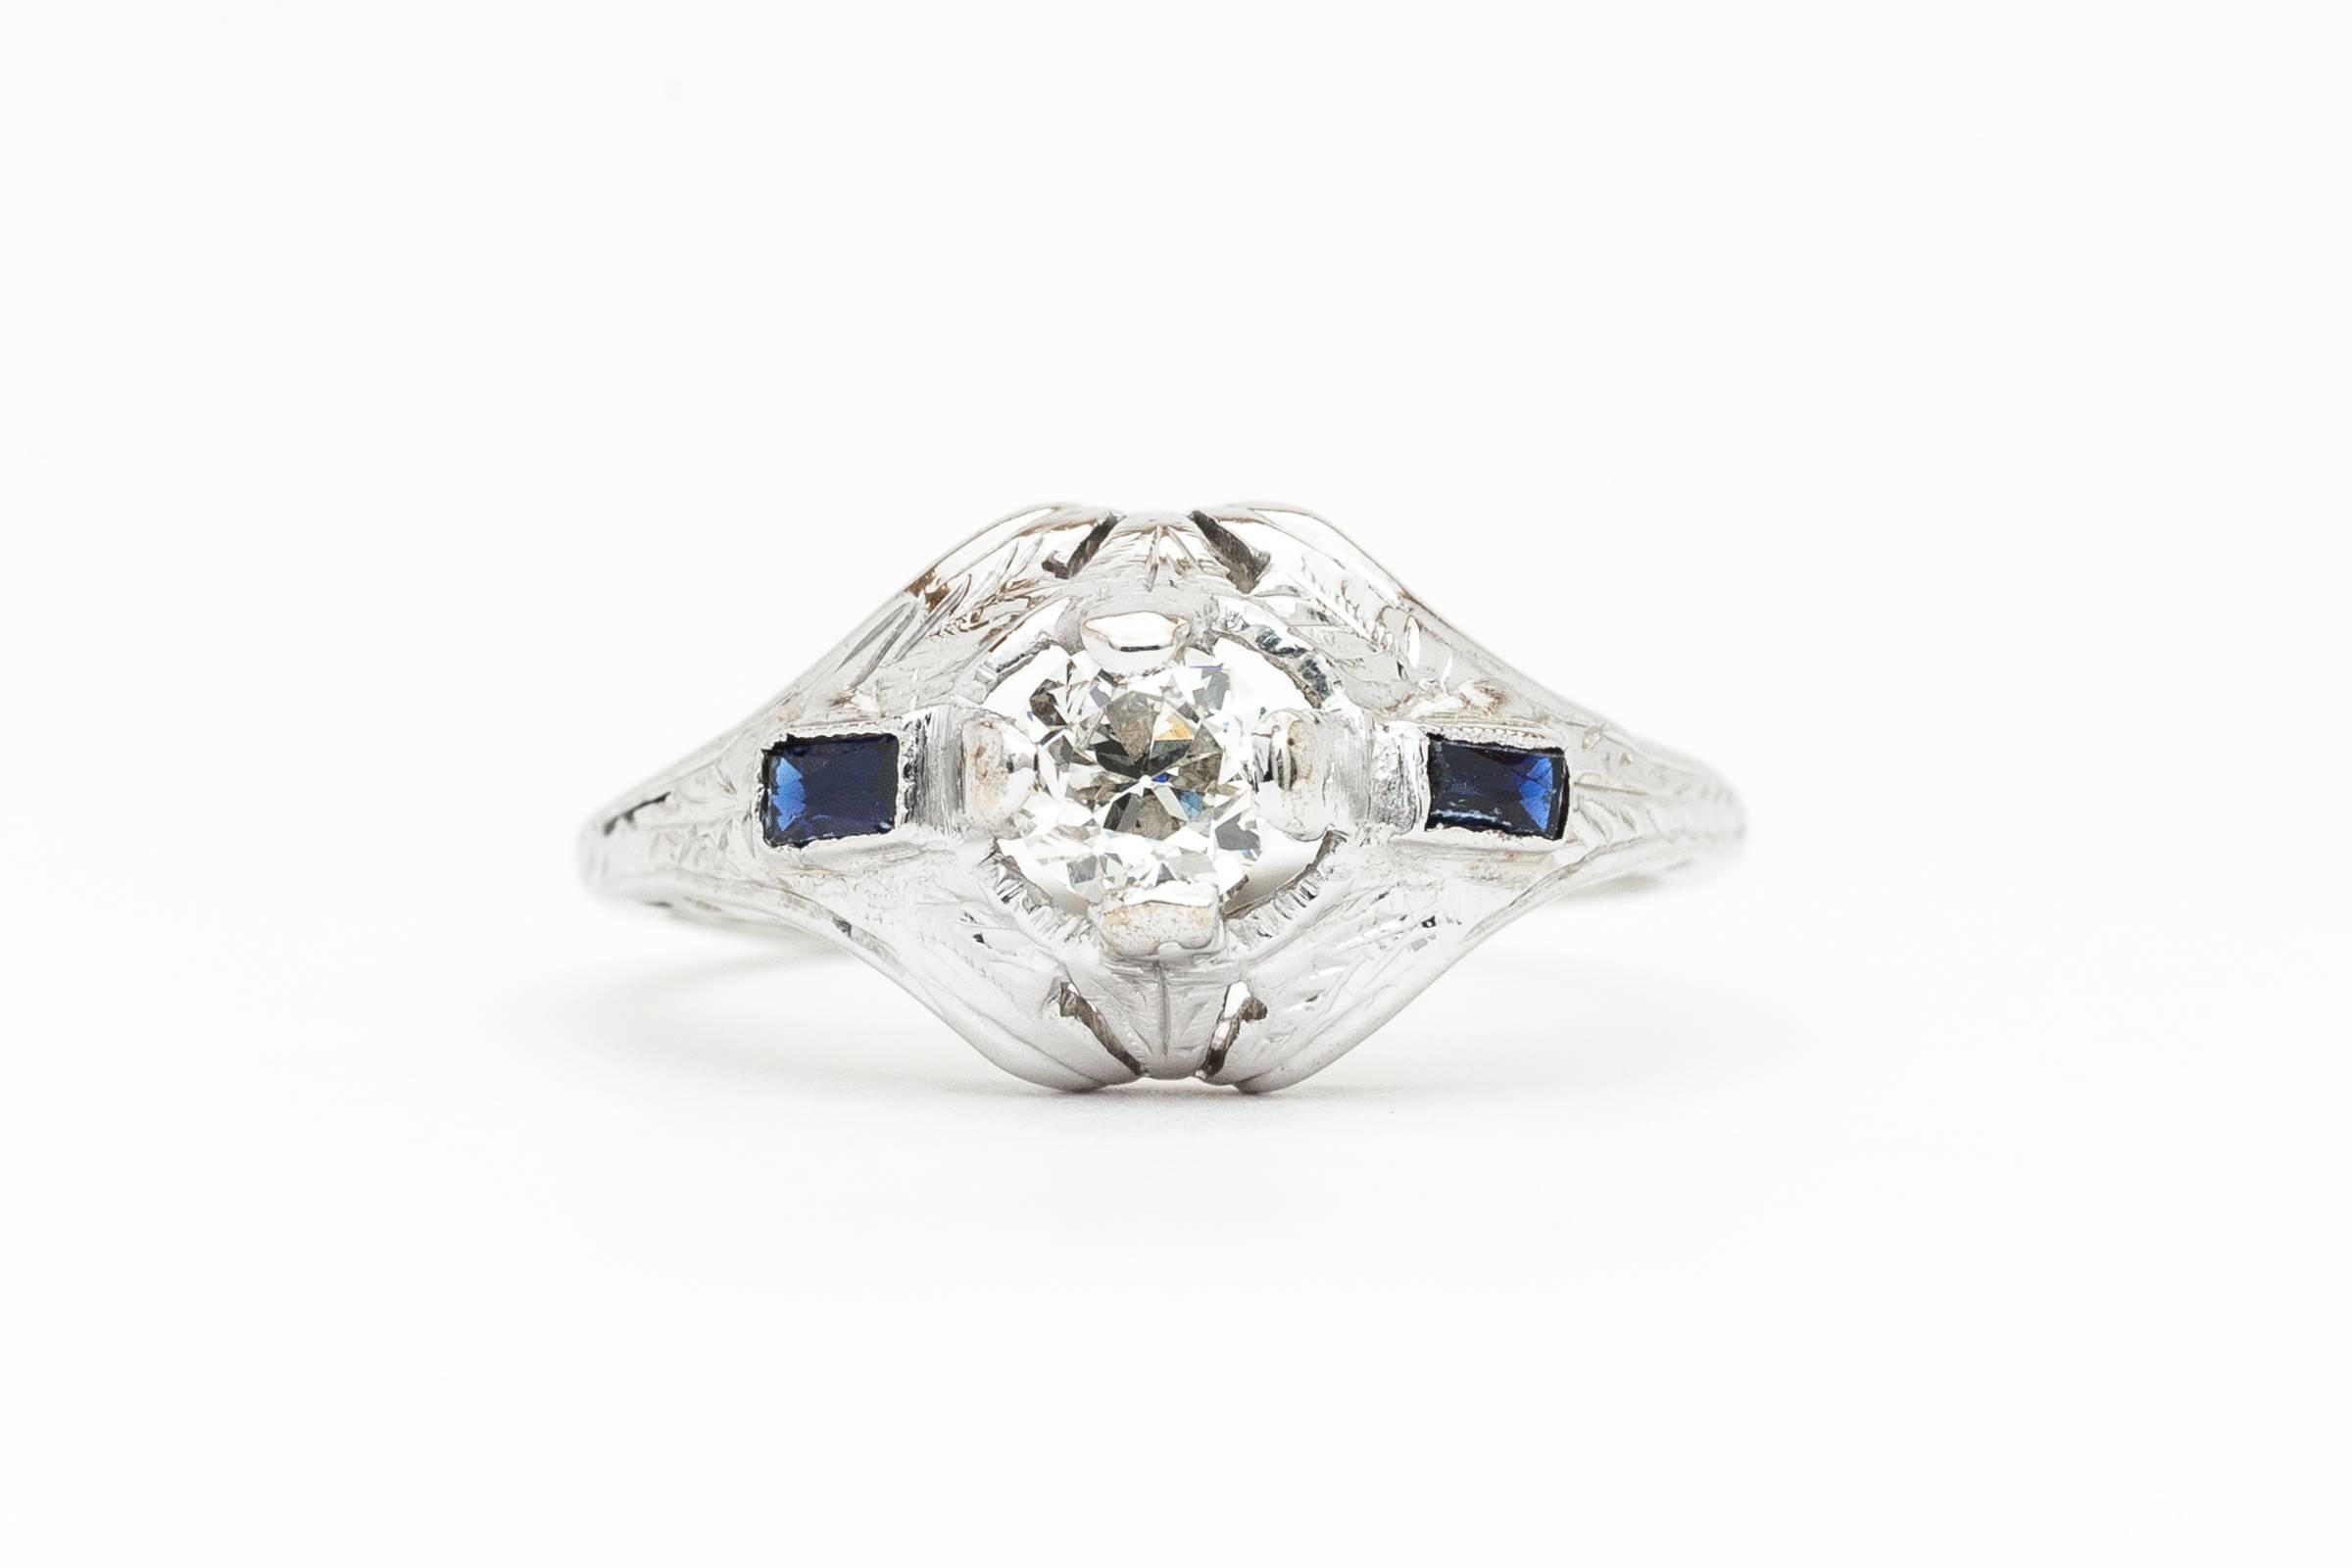 Beacon Hill Jewelers Presents:

A beautiful art deco period diamond and sapphire engagement ring in 18 karat white gold. Centered by a sparkling 0.40ct old European cut diamond this ring features beautiful hand engraving and filigree work